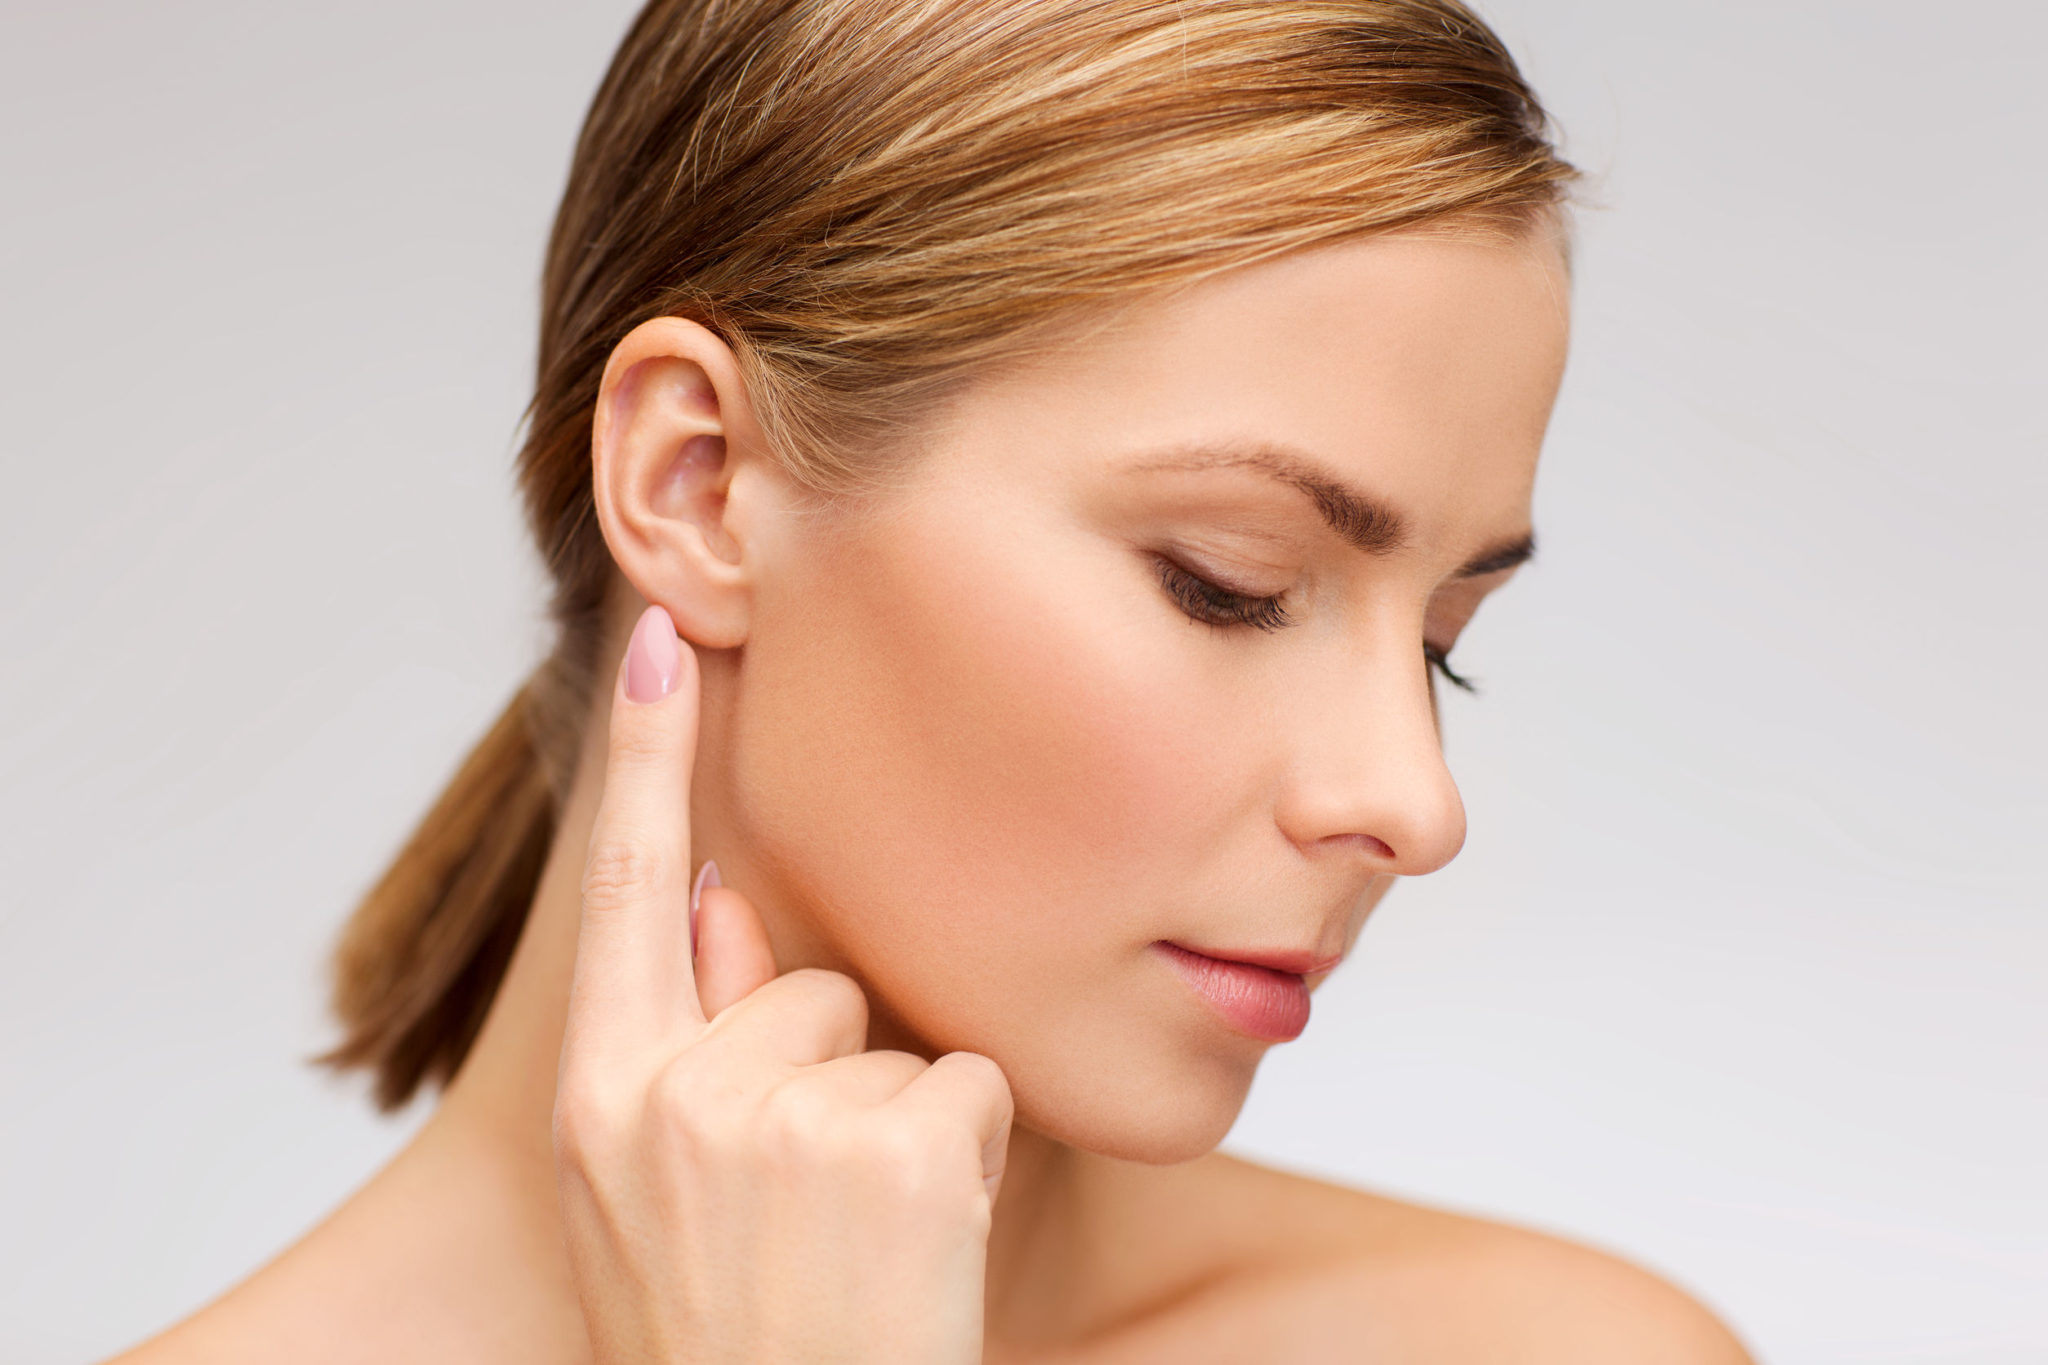 facial plastic surgery options in Charleston, SC